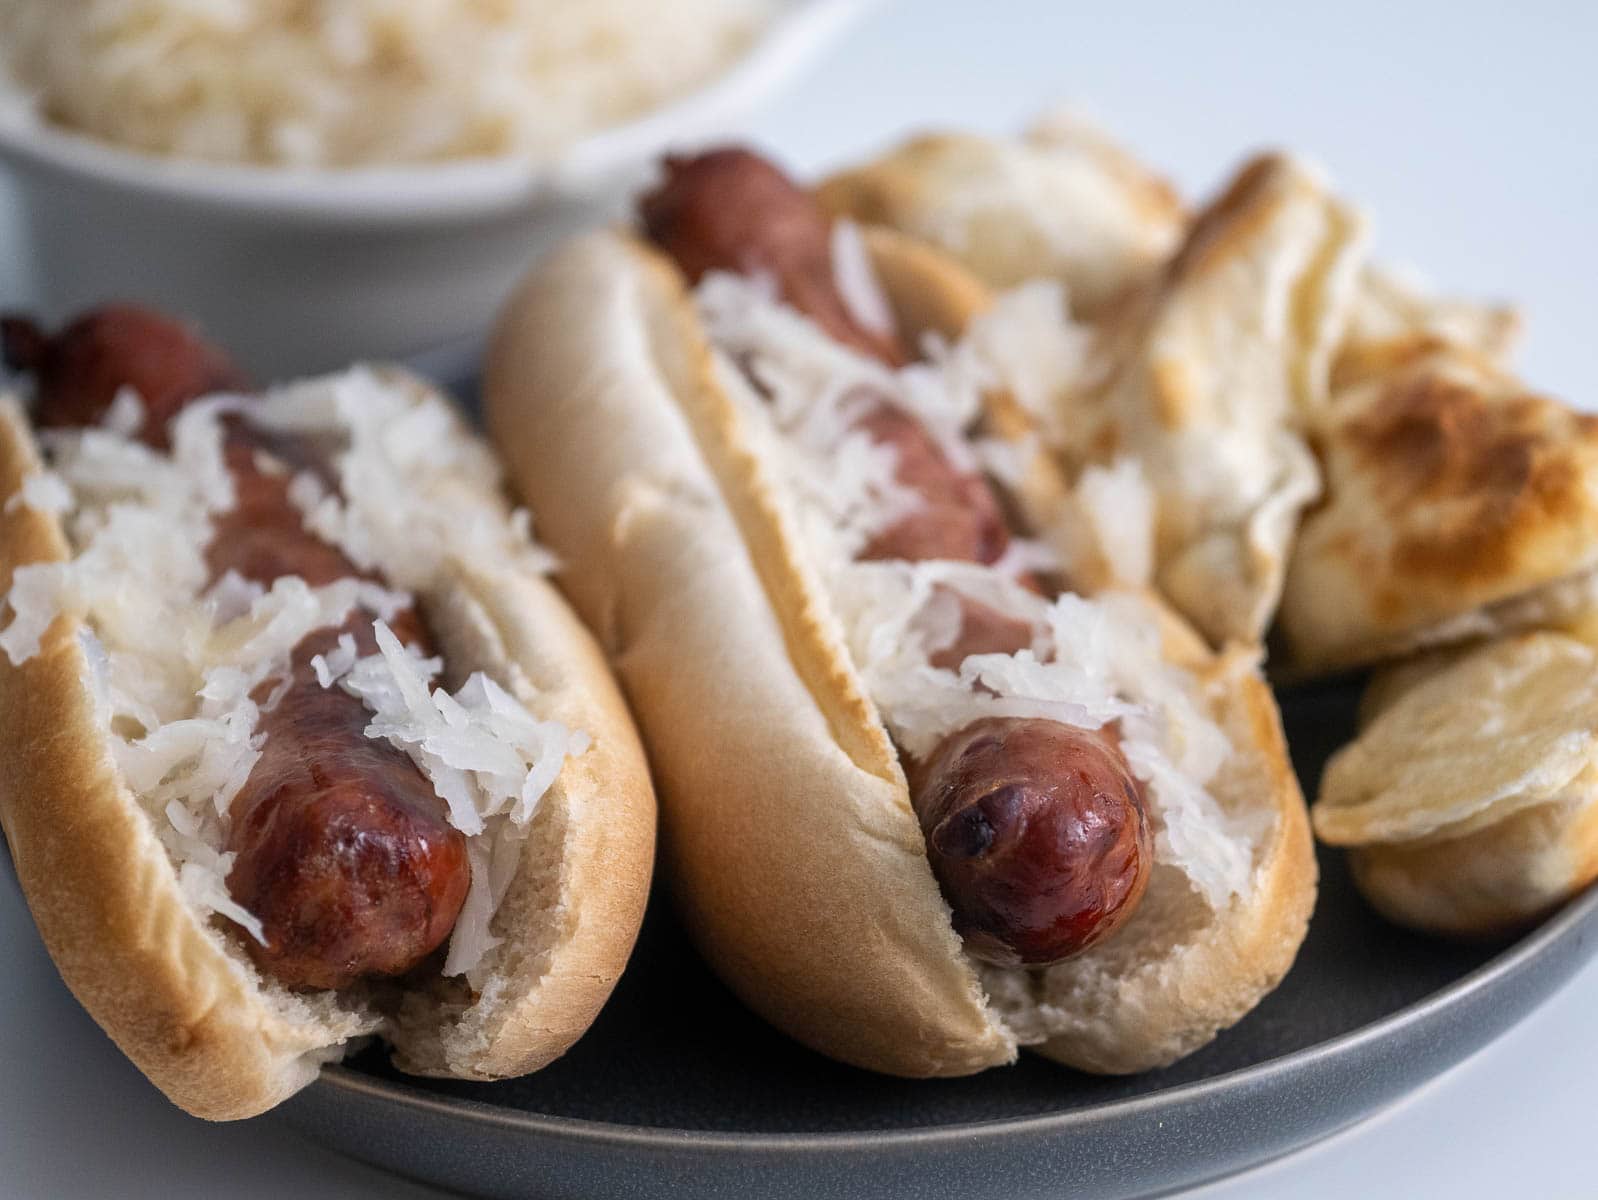 Two brats on a plate in buns topped with sauerkraut.